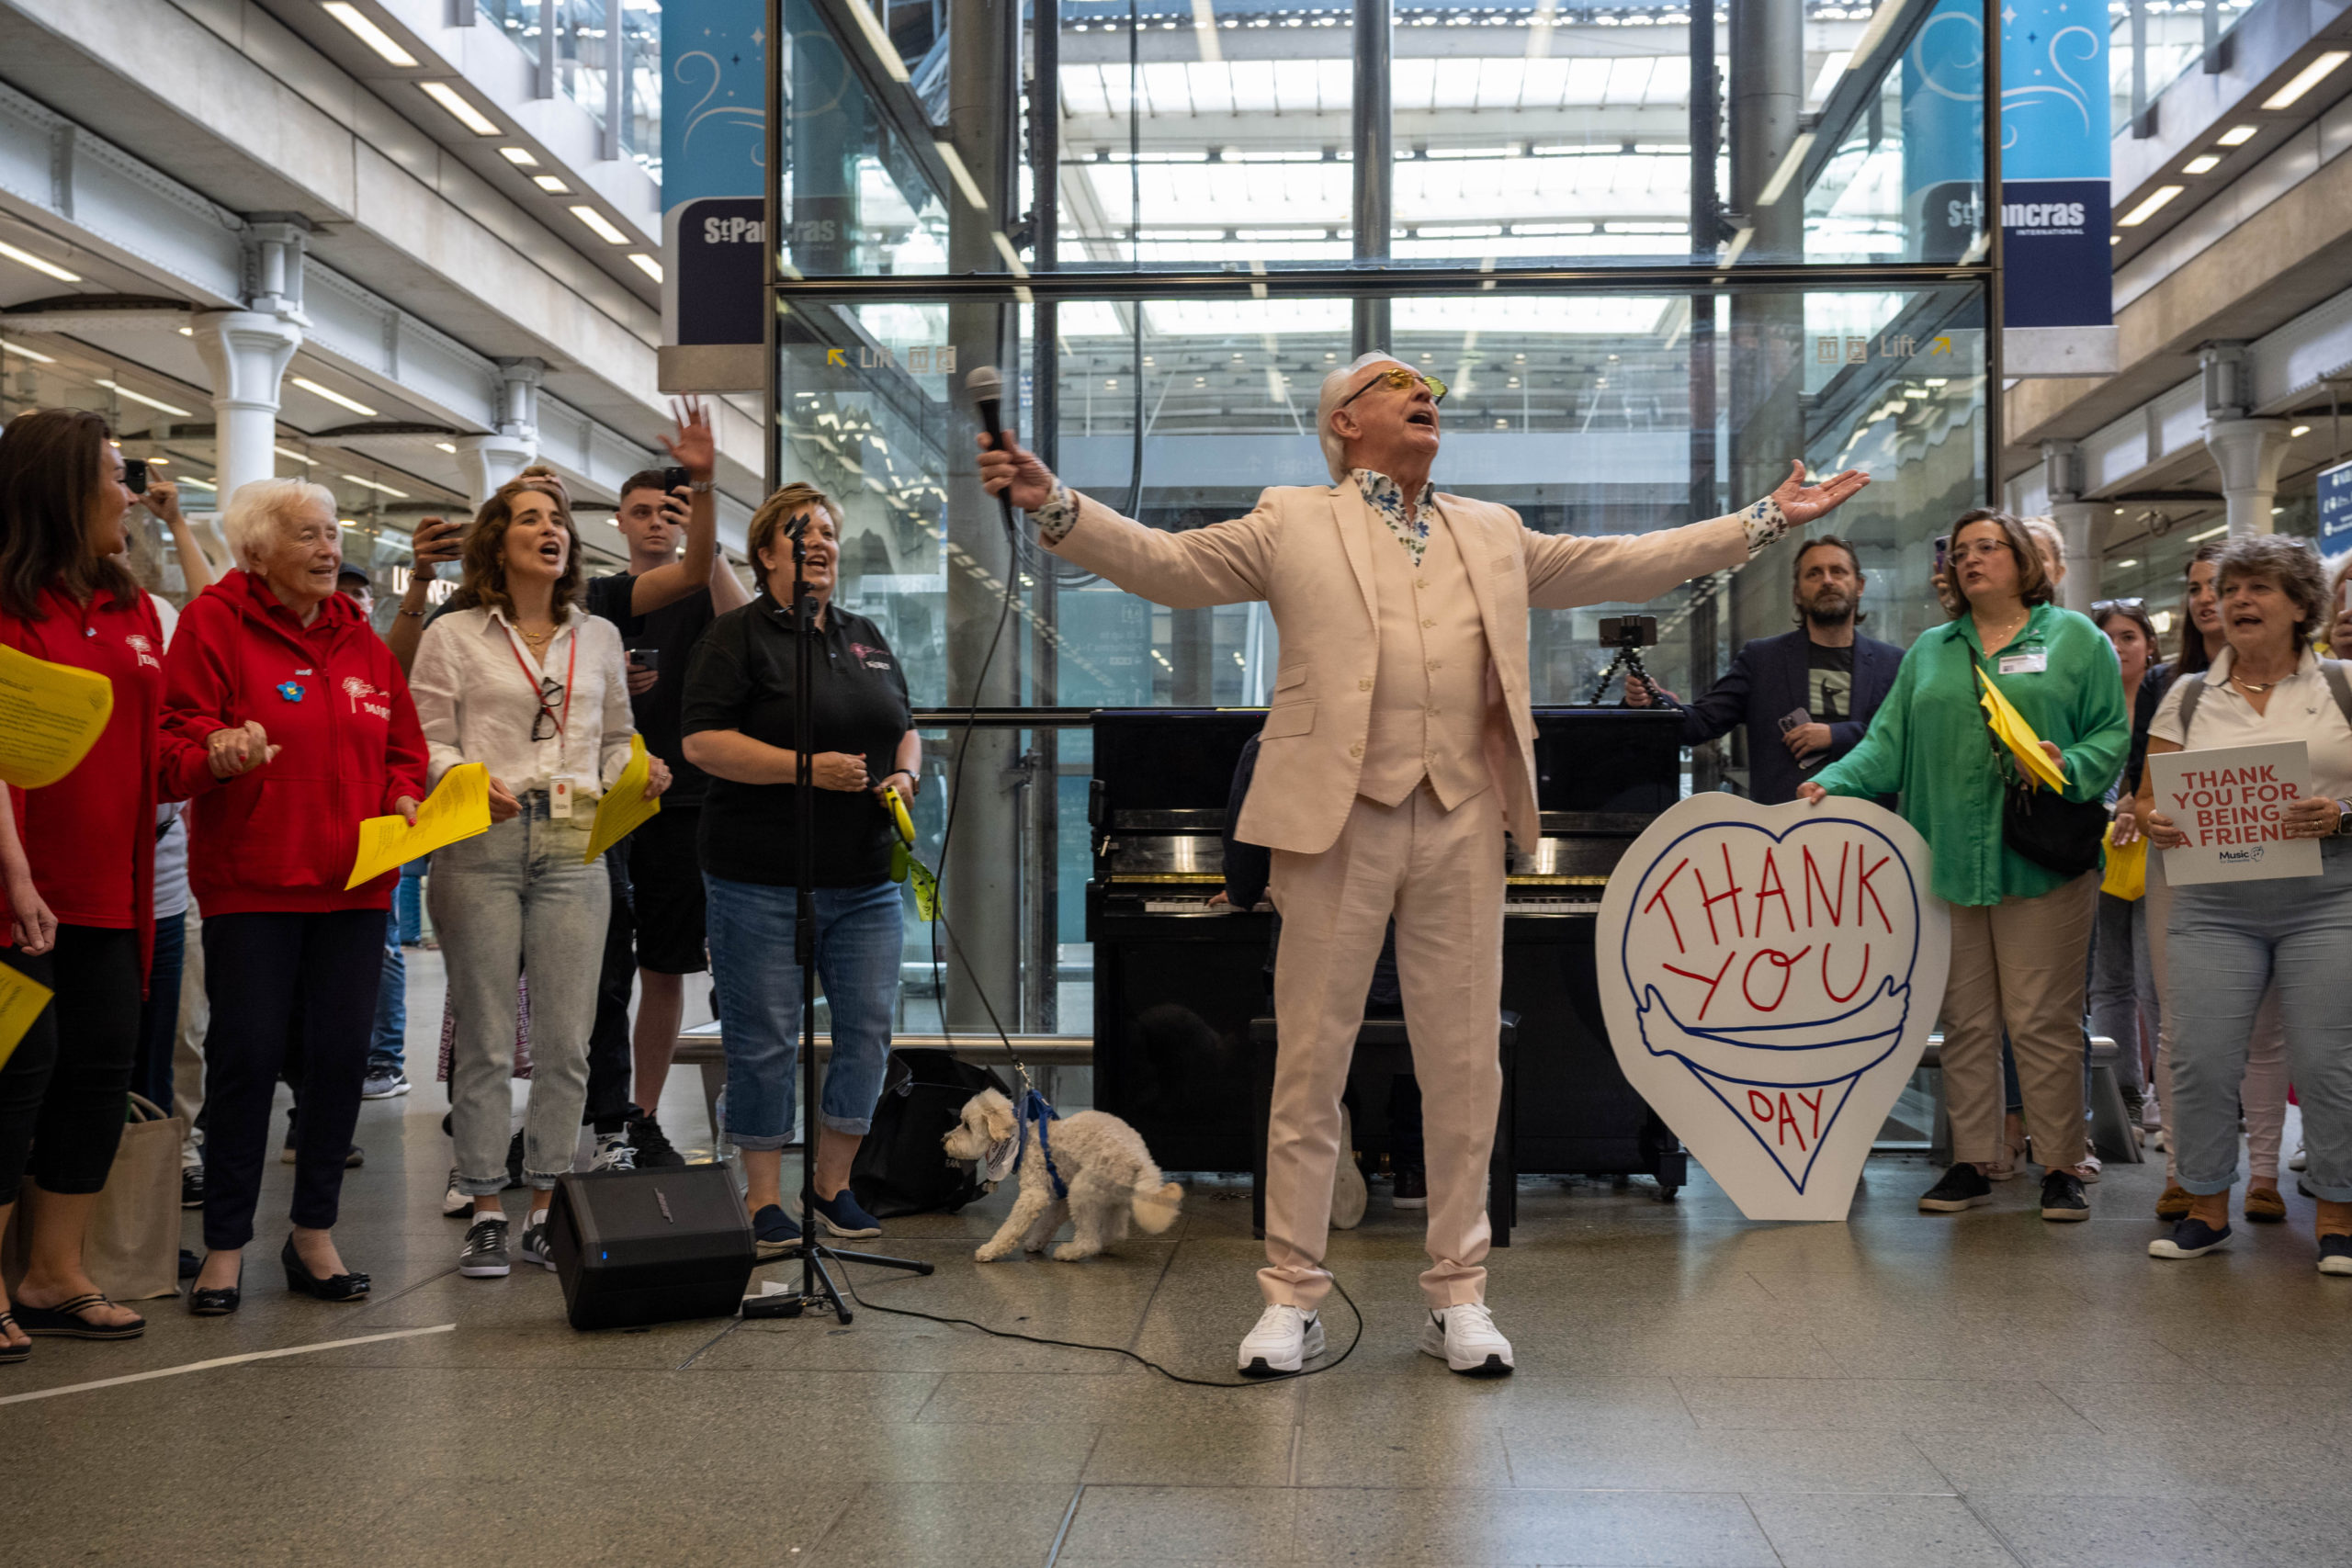 Thank You Day gathering in St Pancras Station